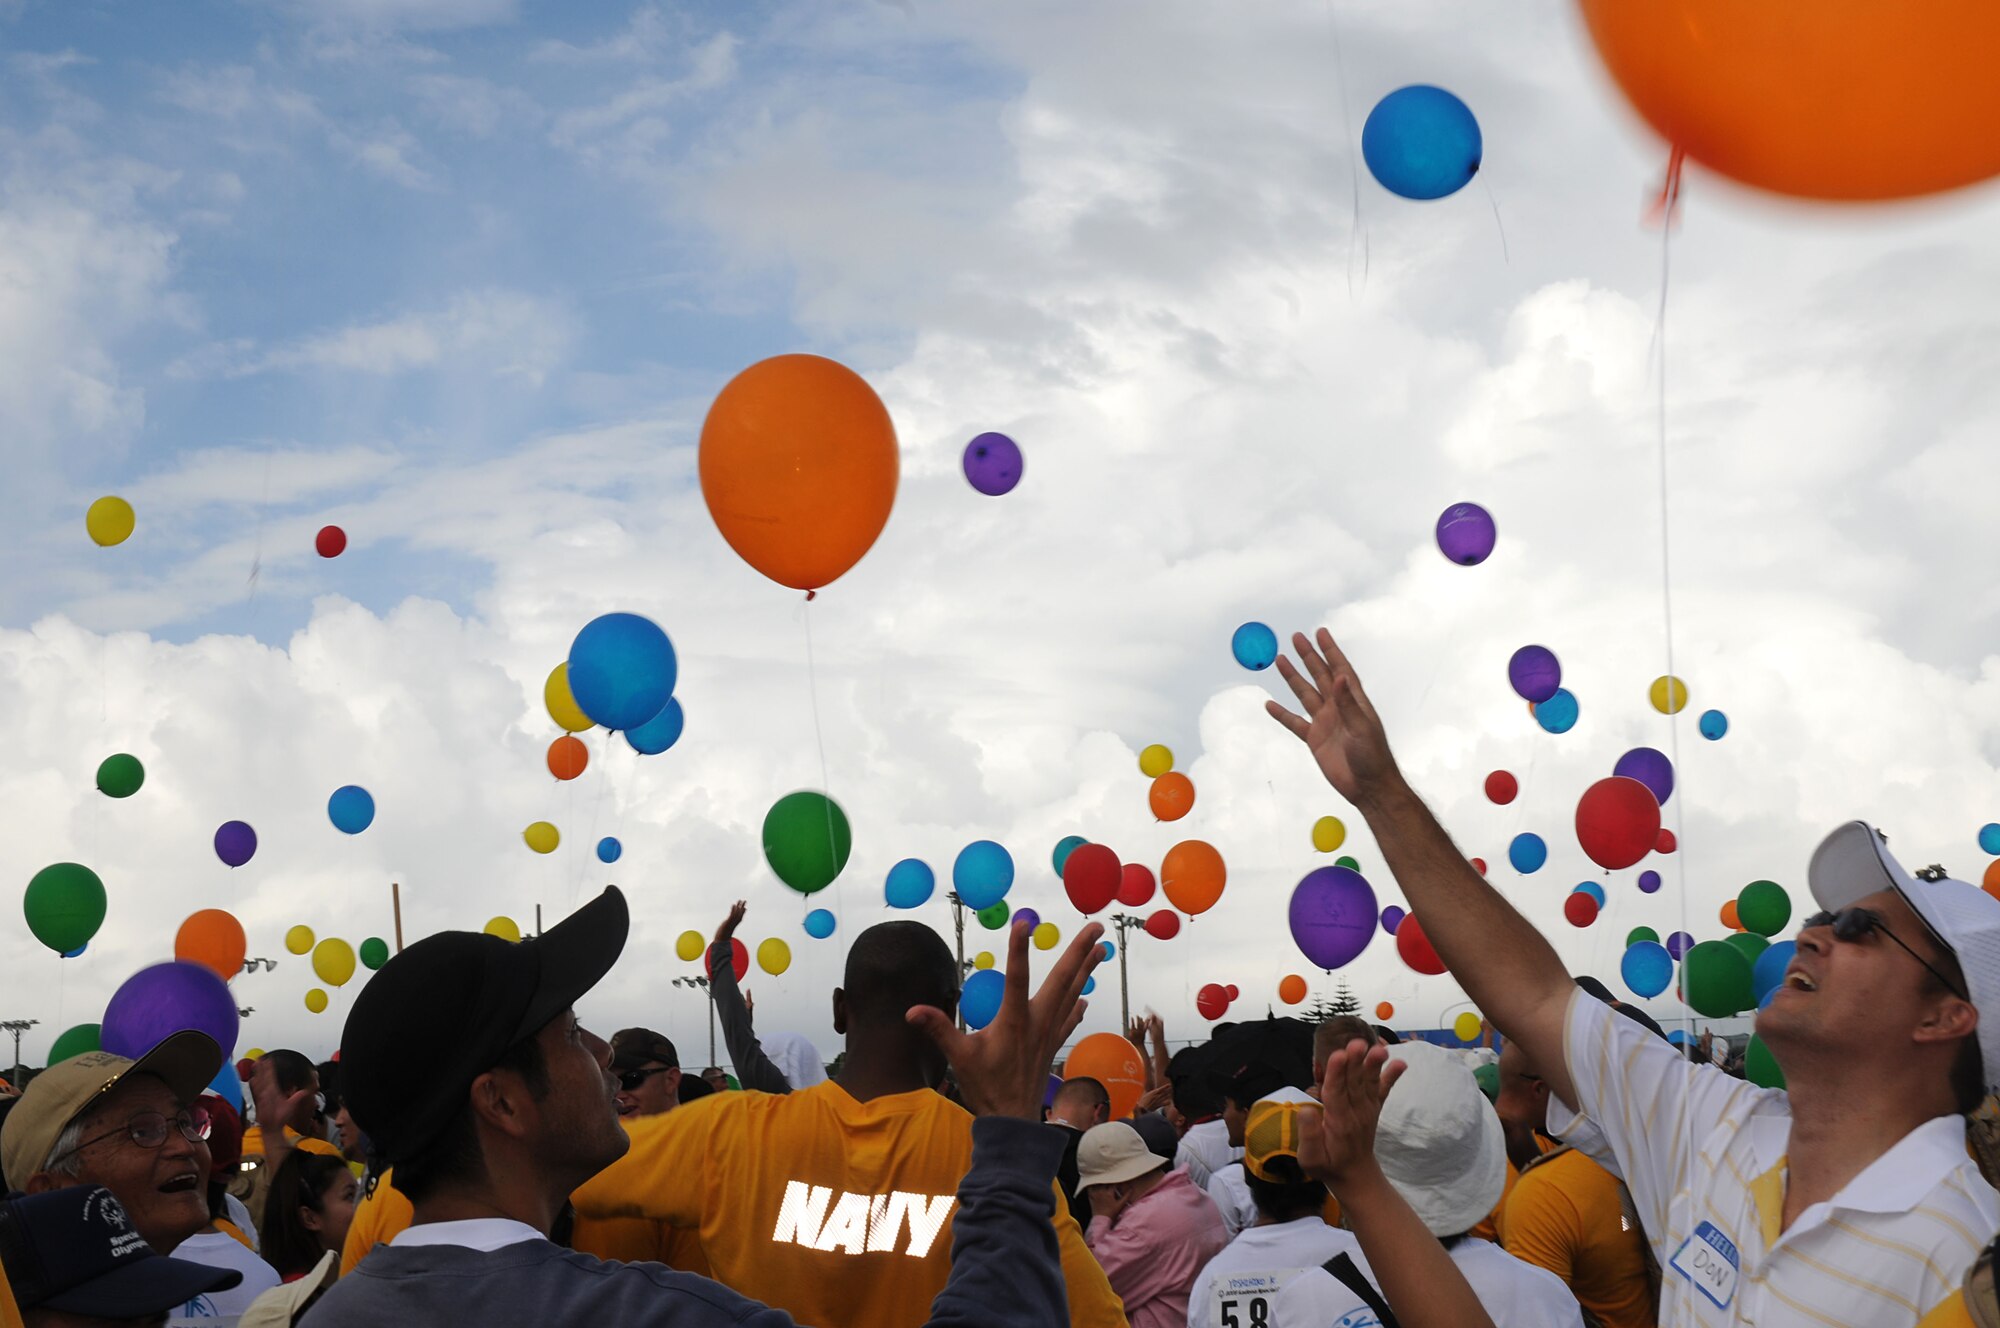 Military volunteers and participants release over a 1,000 balloons into the sky signaling the start of the 9th Annual Kadena Special Olympics Nov. 8, 2008, Kadena Air Base, Japan. Kadena hosted the games and Art Festival for special needs Okinawan and American adult and child athletes.   (U.S. Air Force photo/Staff Sgt. Chrissy Best)
                                             